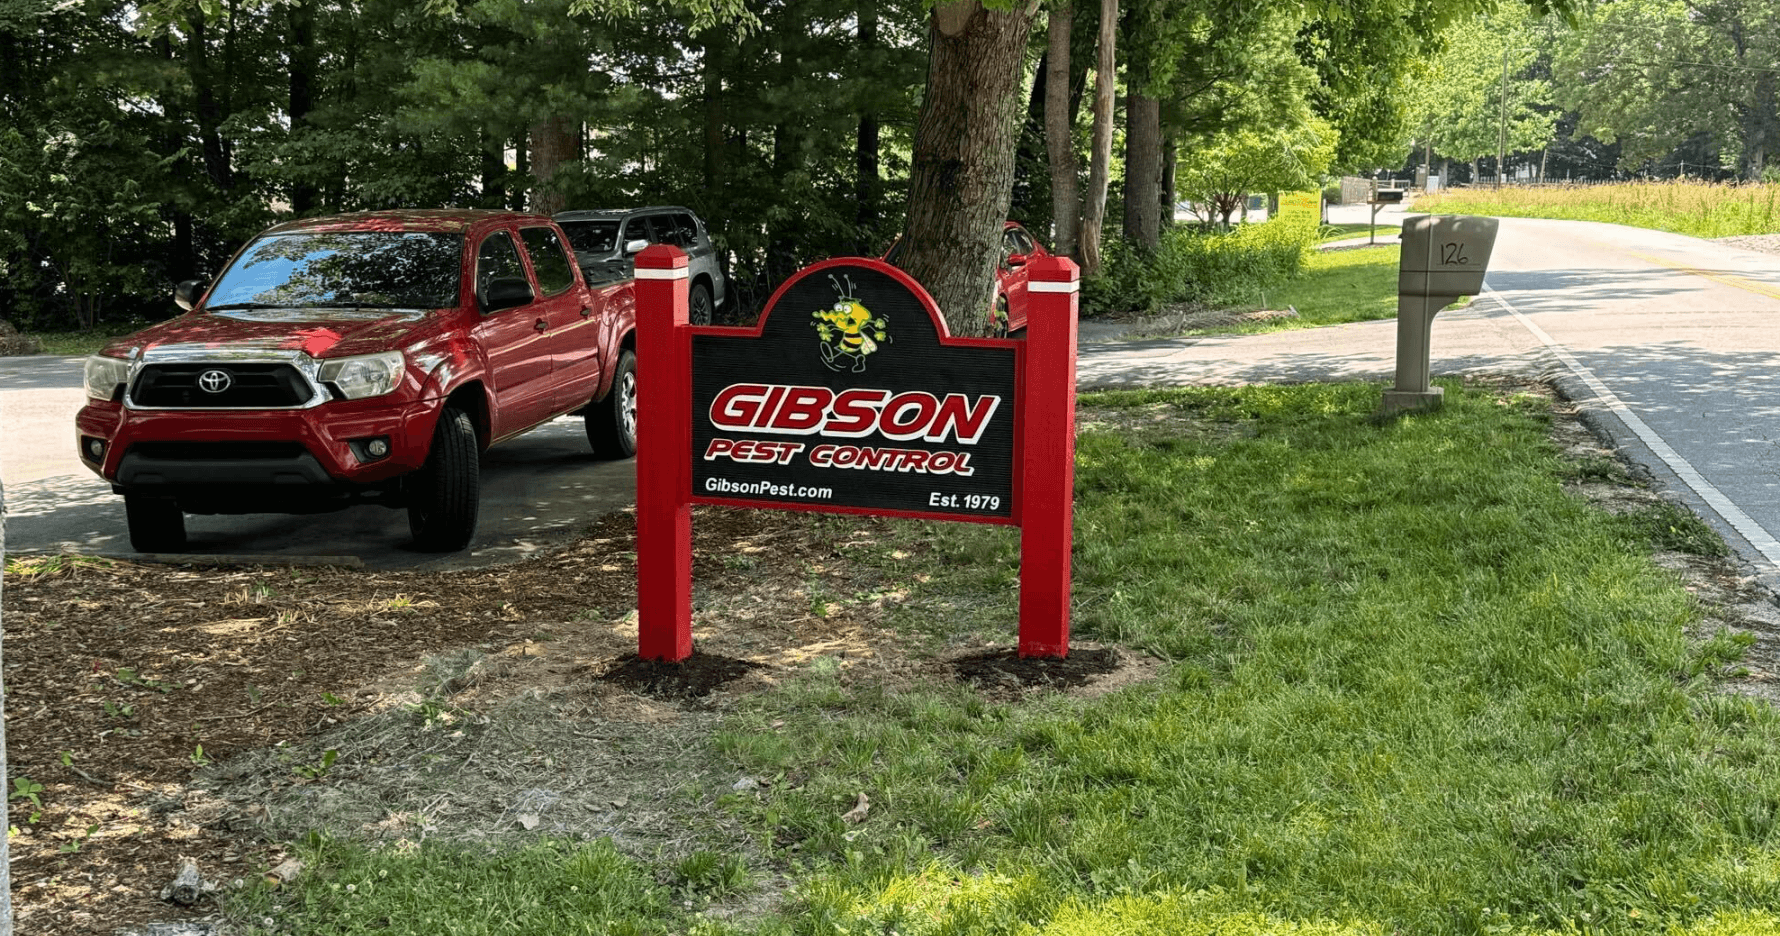 Gibson Pest Control Truck and Office Signage